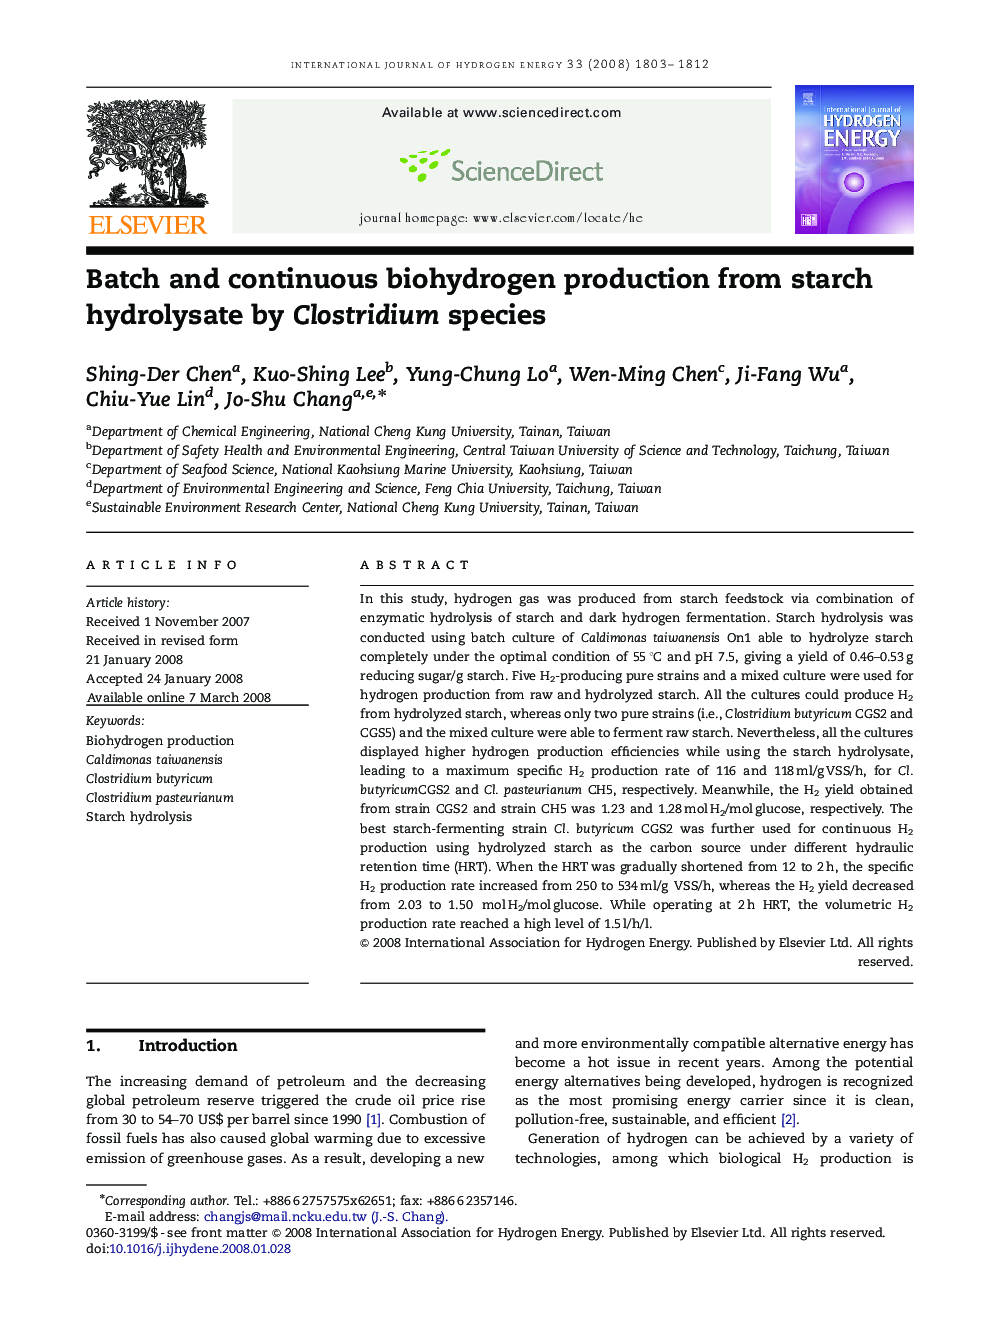 Batch and continuous biohydrogen production from starch hydrolysate by Clostridium species